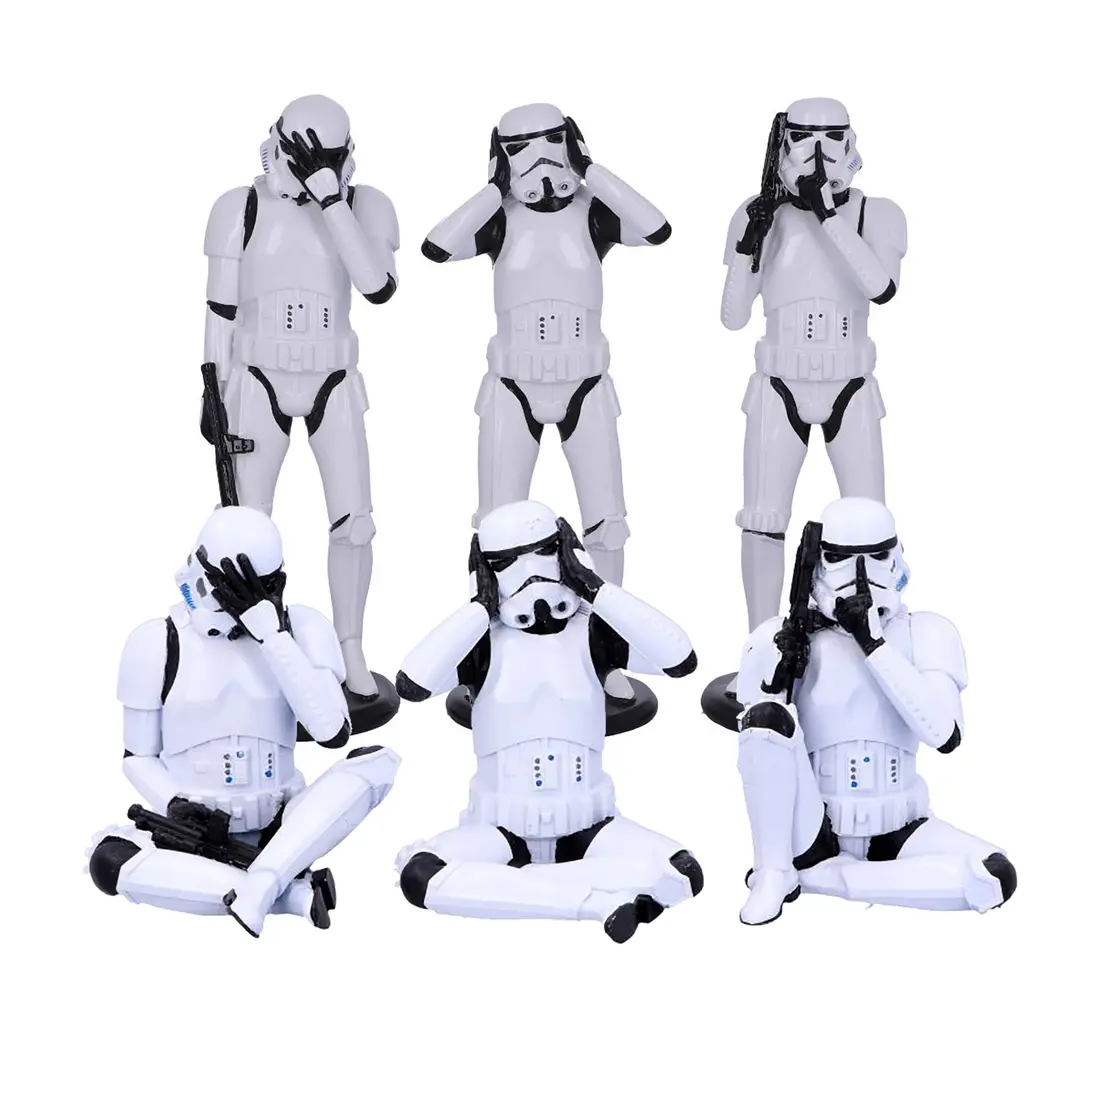 adie yates recommends images of stormtroopers pic